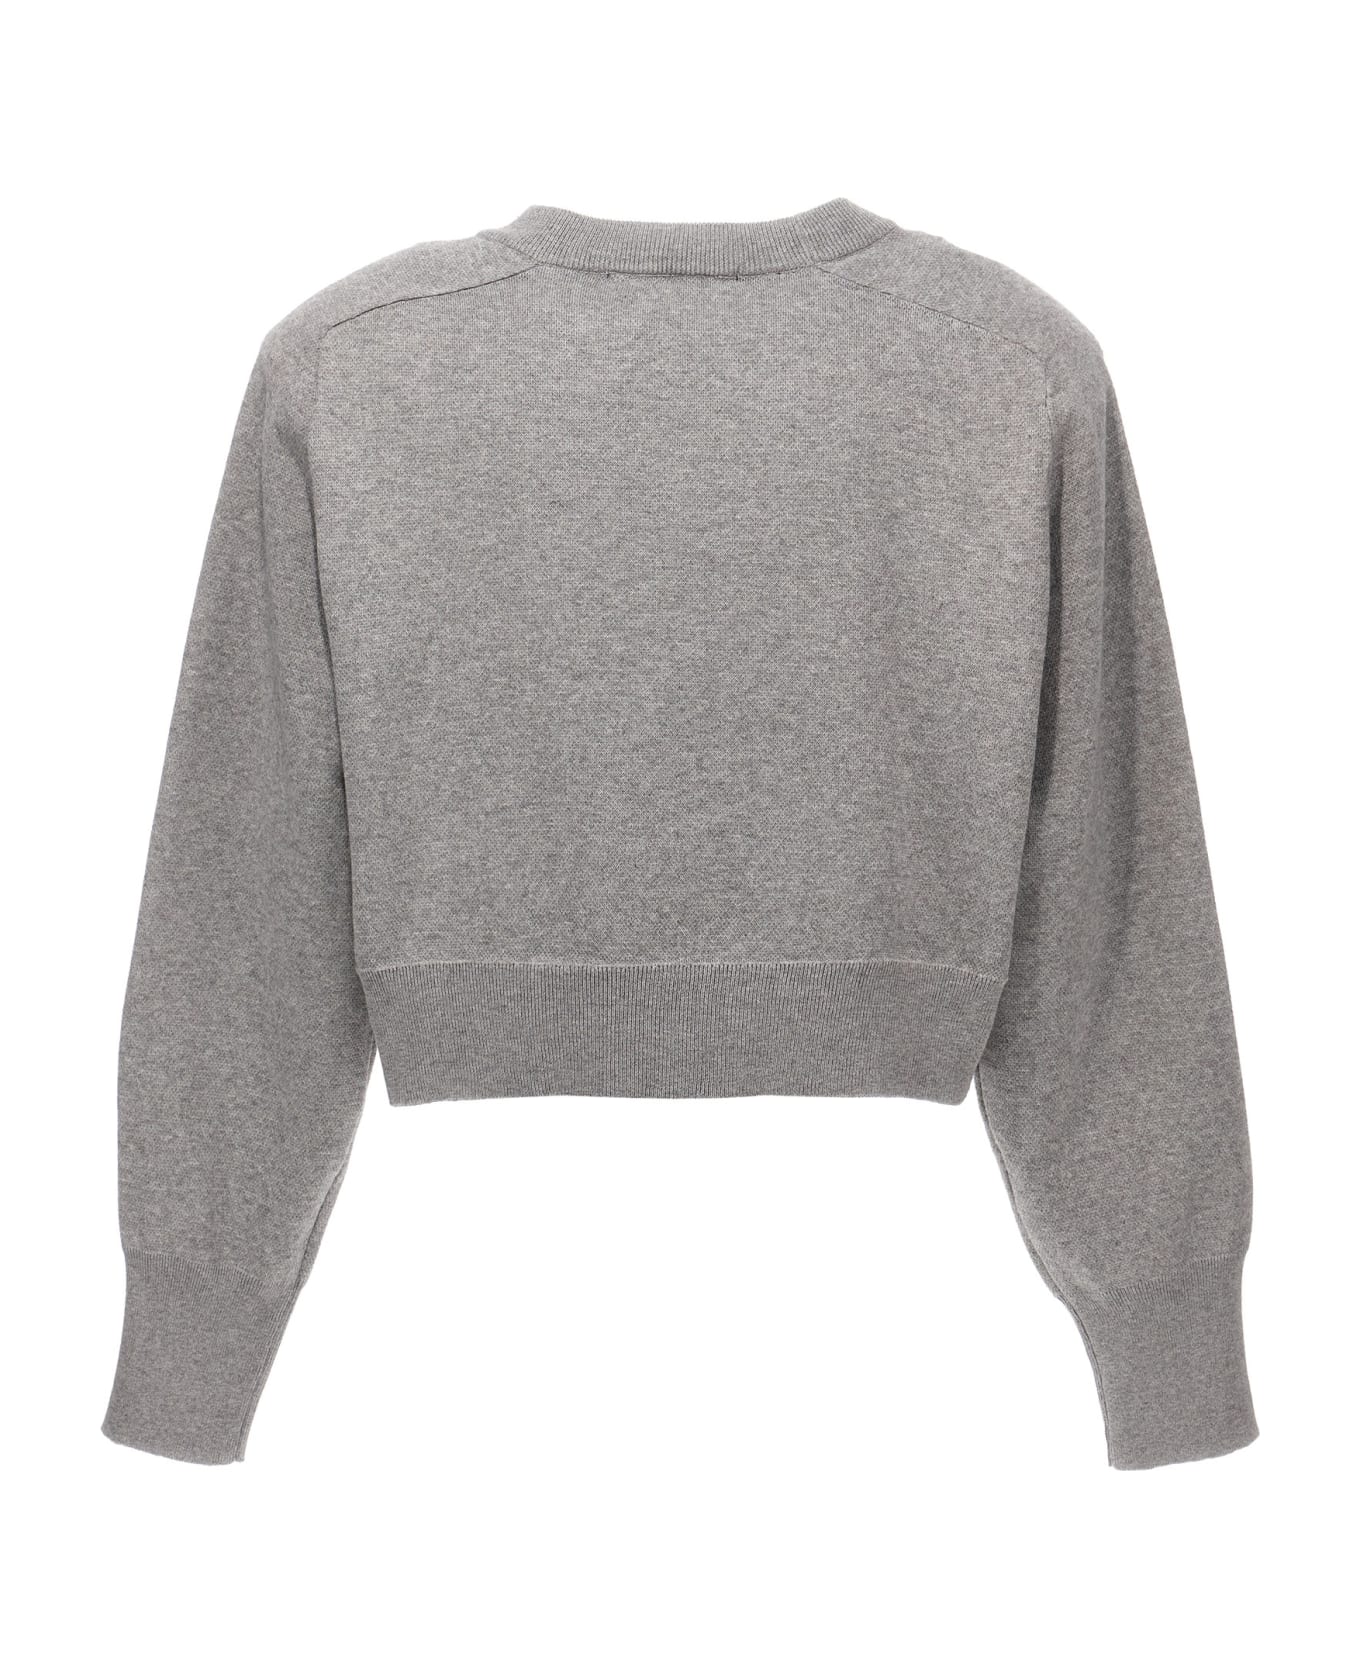 Rotate by Birger Christensen 'firm Knit Cropped' Sweater - Gray ニットウェア